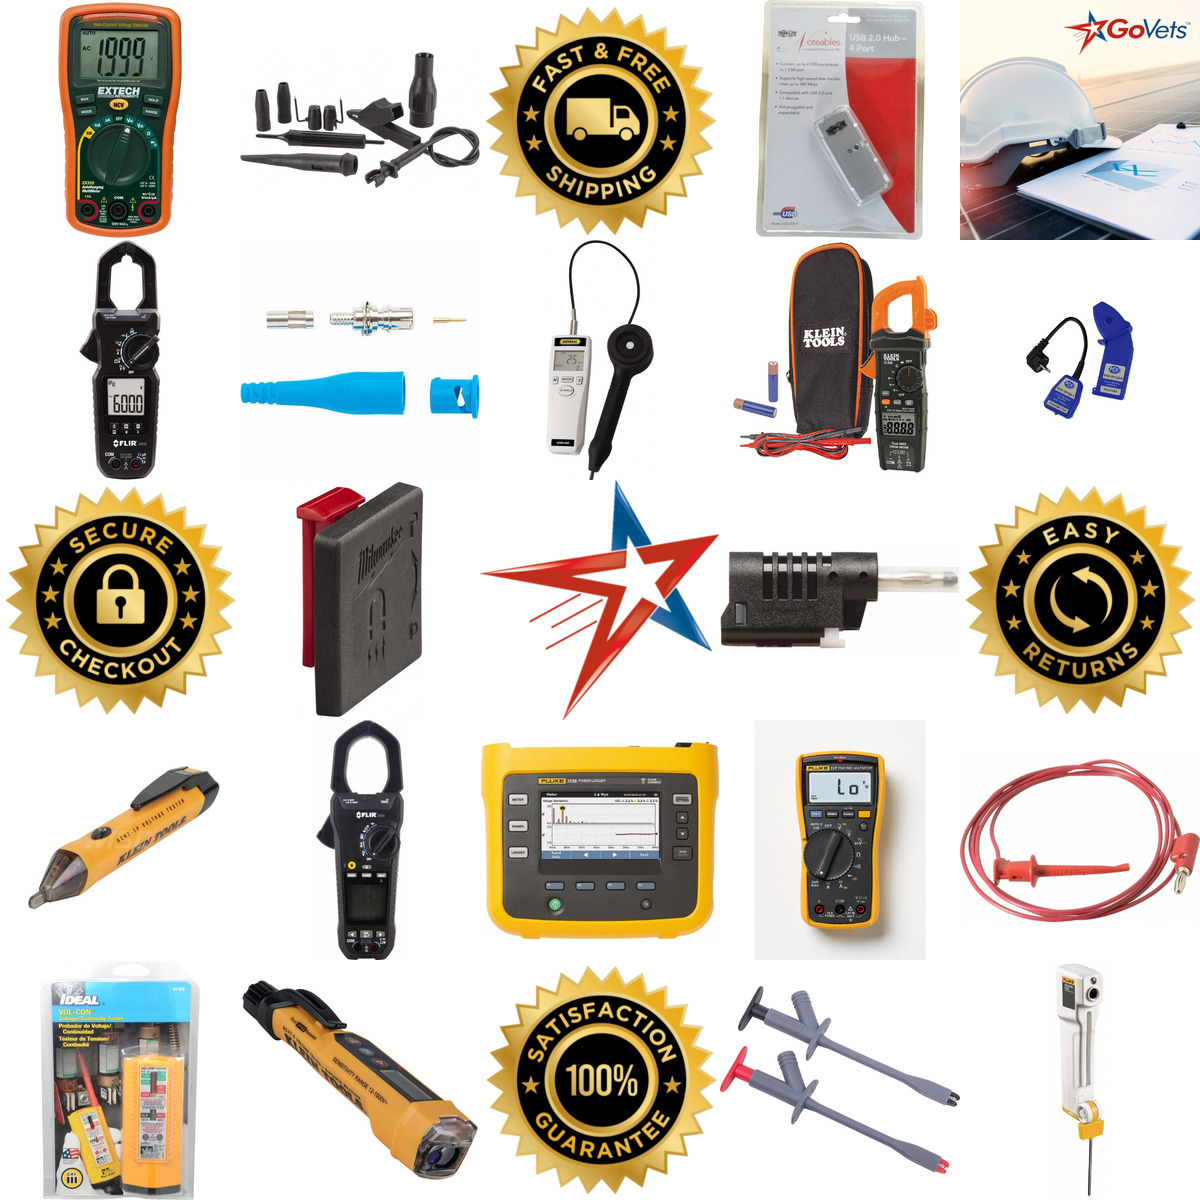 A selection of Electrical Test and Measurement Equipment products on GoVets